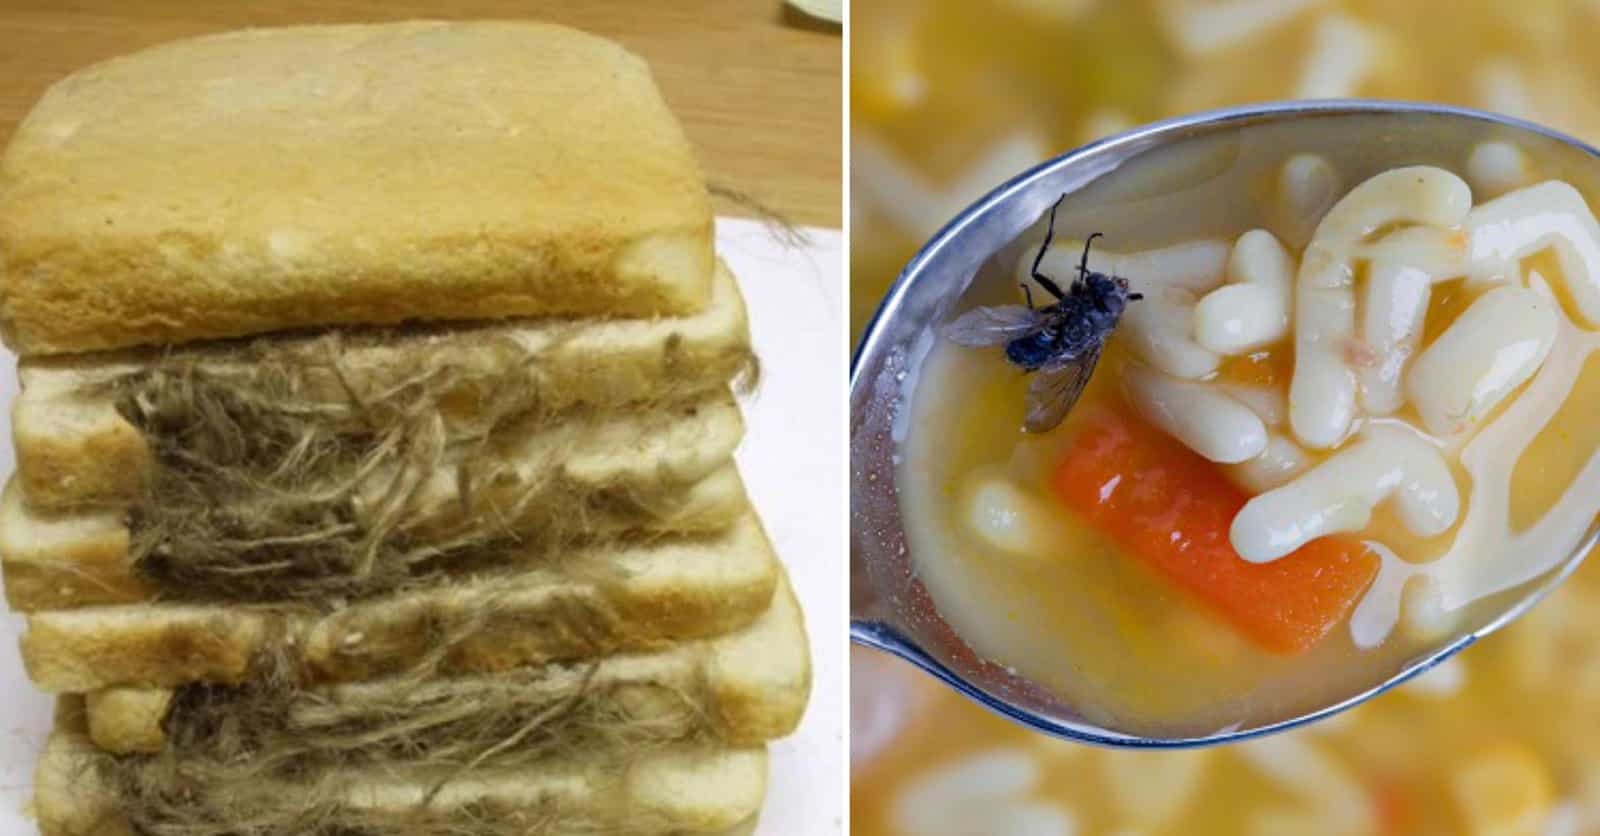 People Reveal The Nastiest Things They've Ever Found In Their Food At A Restaurant